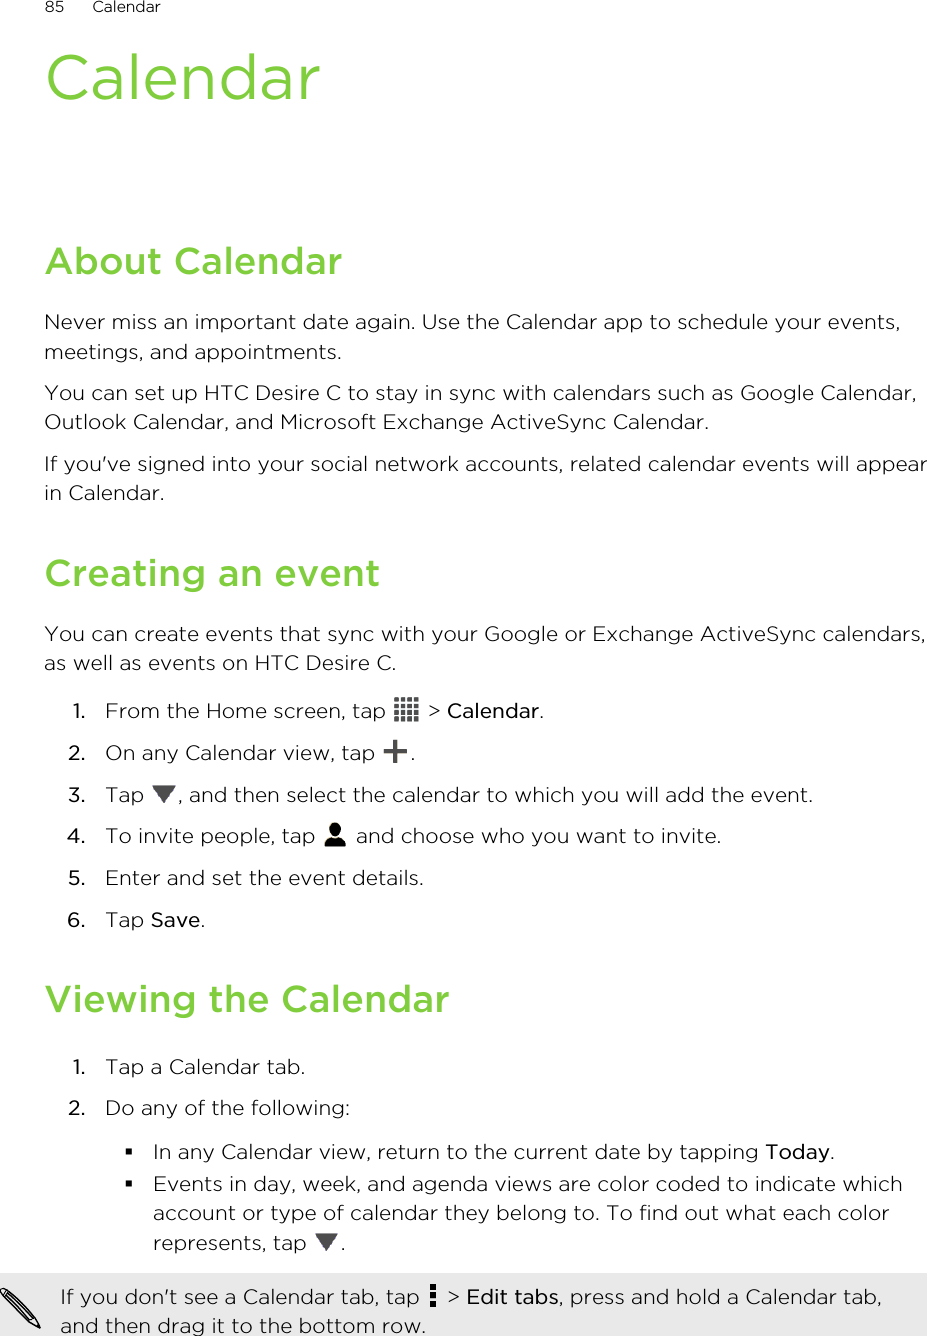 CalendarAbout CalendarNever miss an important date again. Use the Calendar app to schedule your events,meetings, and appointments.You can set up HTC Desire C to stay in sync with calendars such as Google Calendar,Outlook Calendar, and Microsoft Exchange ActiveSync Calendar.If you&apos;ve signed into your social network accounts, related calendar events will appearin Calendar.Creating an eventYou can create events that sync with your Google or Exchange ActiveSync calendars,as well as events on HTC Desire C.1. From the Home screen, tap   &gt; Calendar.2. On any Calendar view, tap  .3. Tap  , and then select the calendar to which you will add the event.4. To invite people, tap   and choose who you want to invite.5. Enter and set the event details.6. Tap Save.Viewing the Calendar1. Tap a Calendar tab.2. Do any of the following:§In any Calendar view, return to the current date by tapping Today.§Events in day, week, and agenda views are color coded to indicate whichaccount or type of calendar they belong to. To find out what each colorrepresents, tap  .If you don&apos;t see a Calendar tab, tap   &gt; Edit tabs, press and hold a Calendar tab,and then drag it to the bottom row.85 Calendar